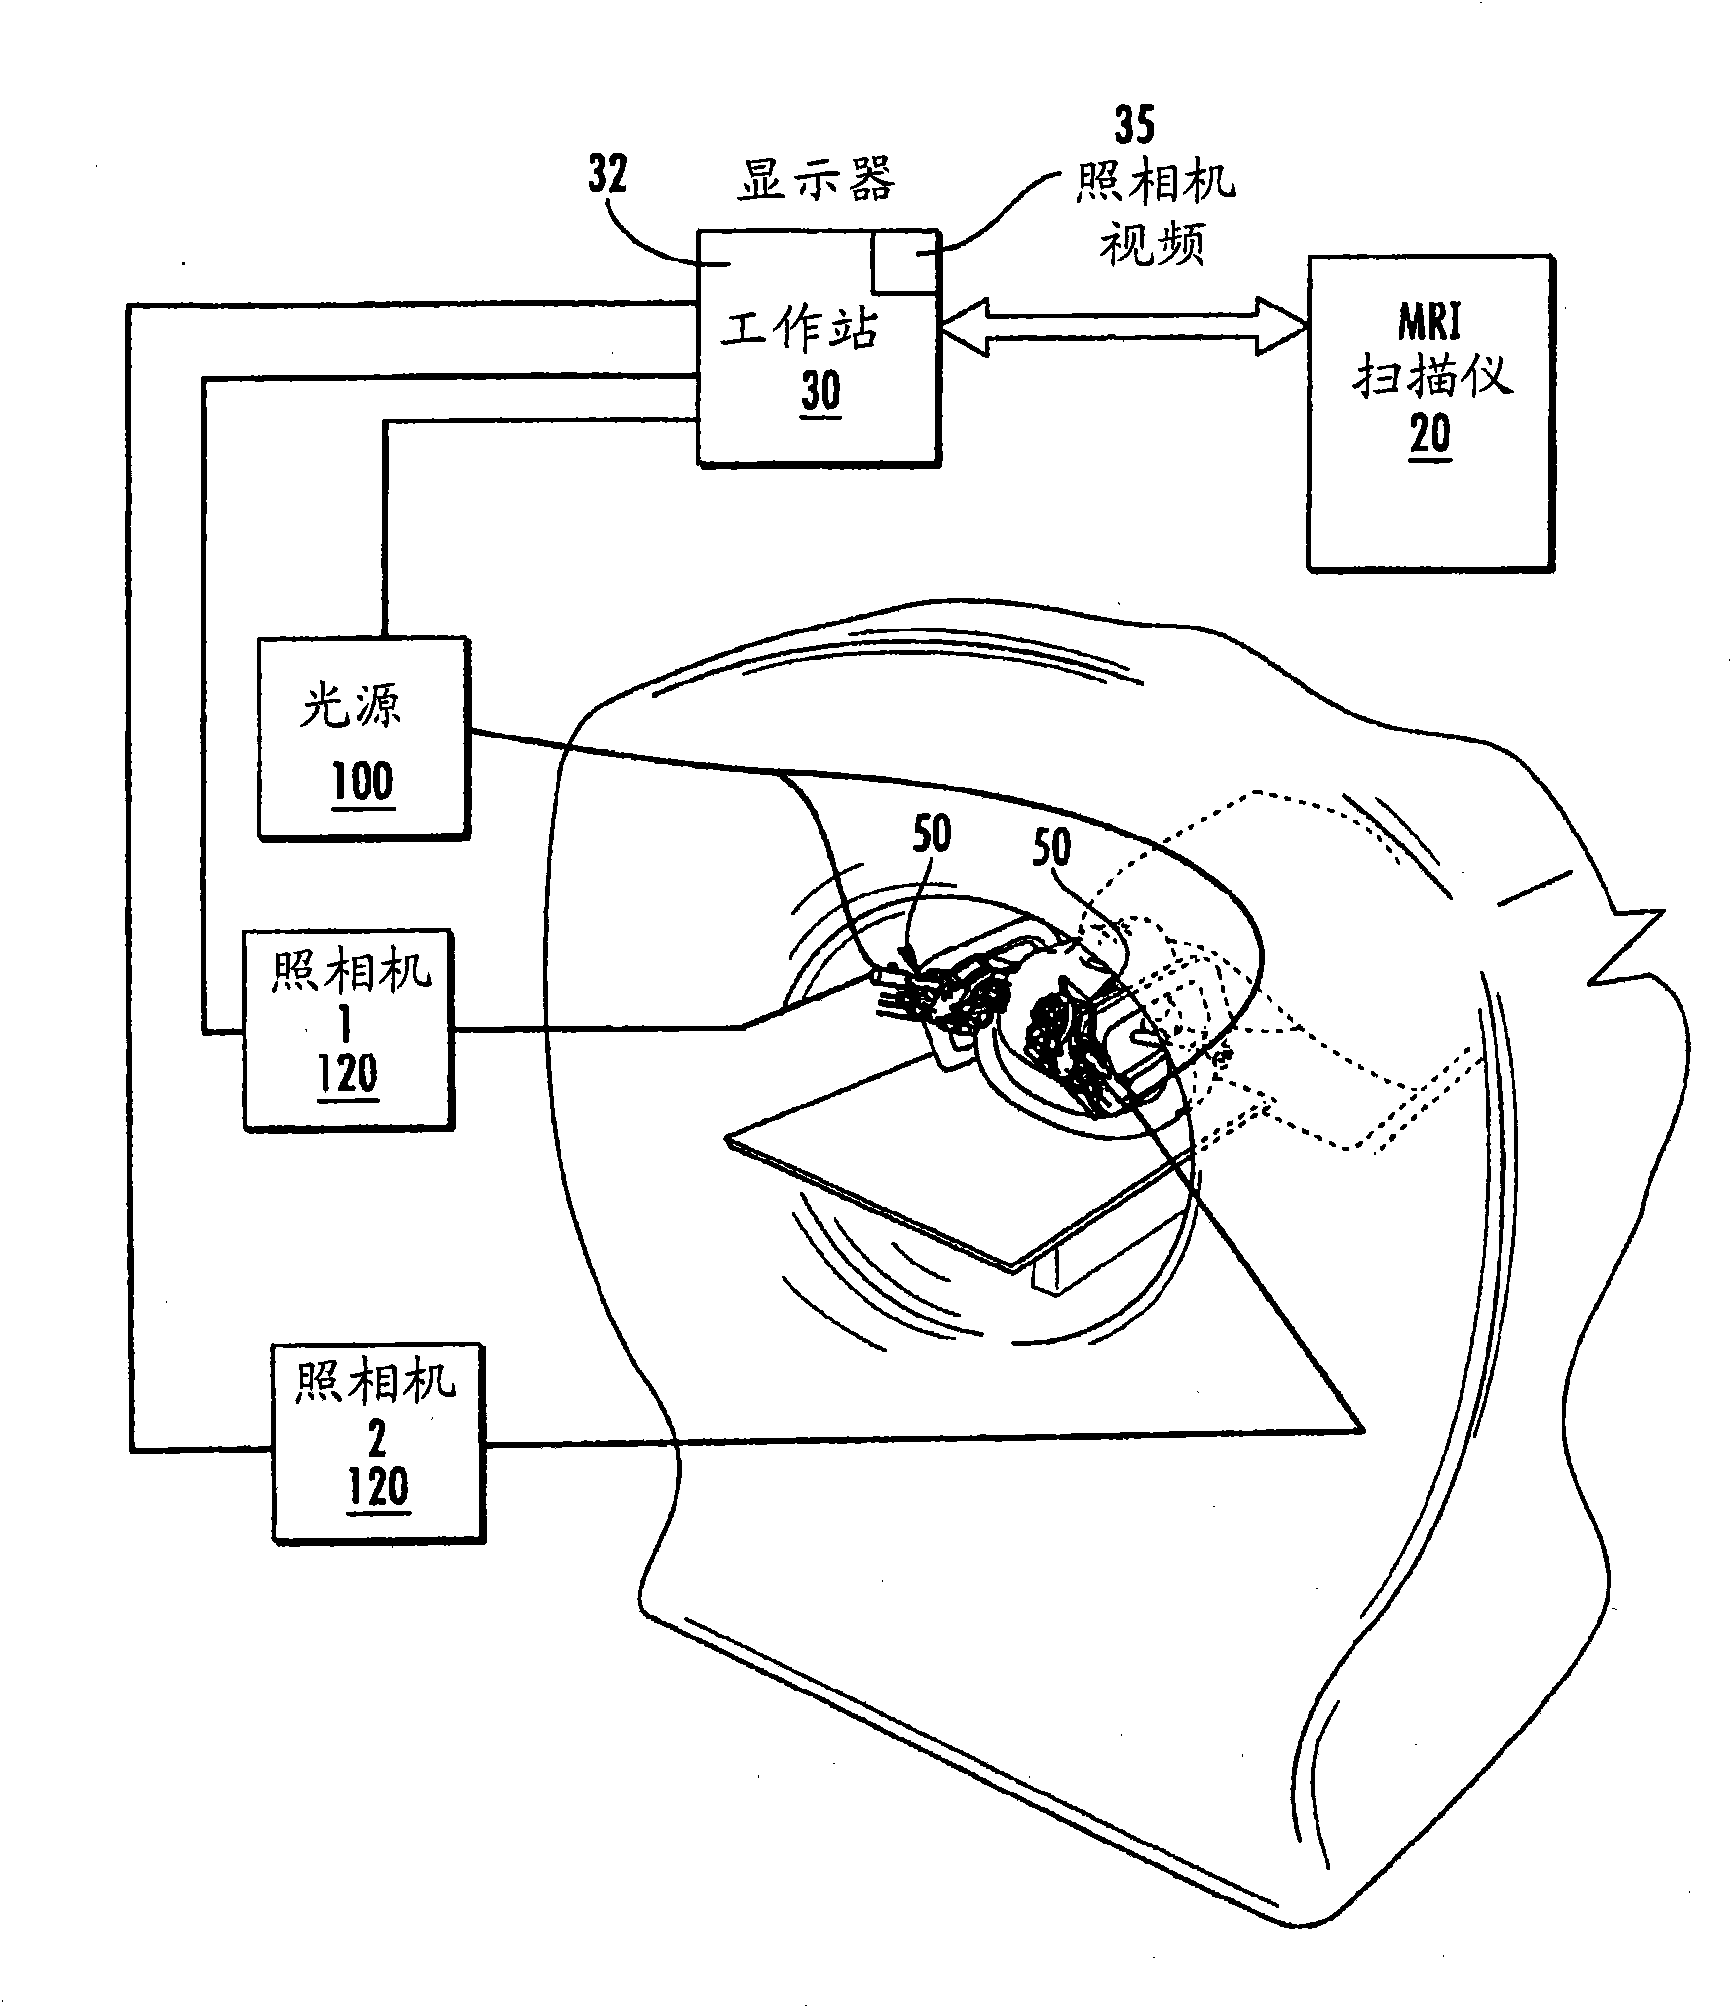 MRI surgical systems for real-time visualizations using MRI image data and predefined data of surgical tools